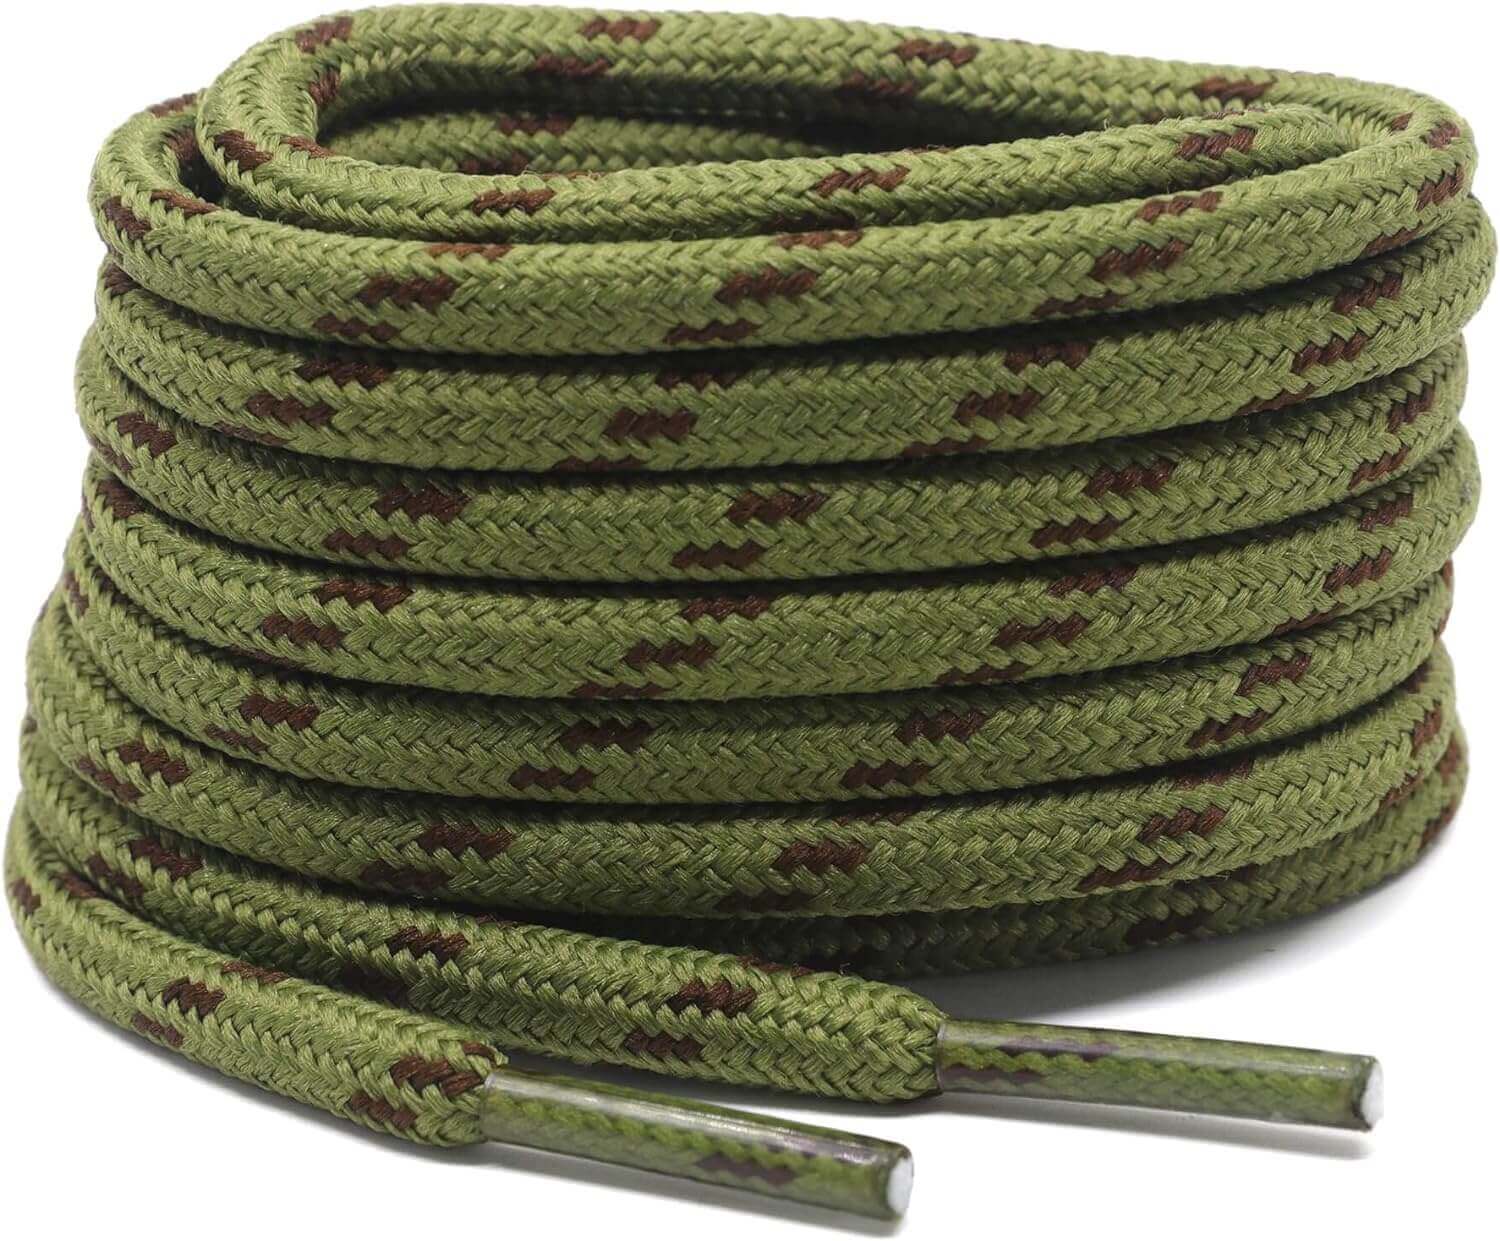 Shop The Latest >2 Pair Work Boot Laces - Hiking, Walking, Shoelaces > *Only $13.22*> From The Top Brand > *DELELEl* > Shop Now and Get Free Shipping On Orders Over $45.00 >*Shop Earth Foot*